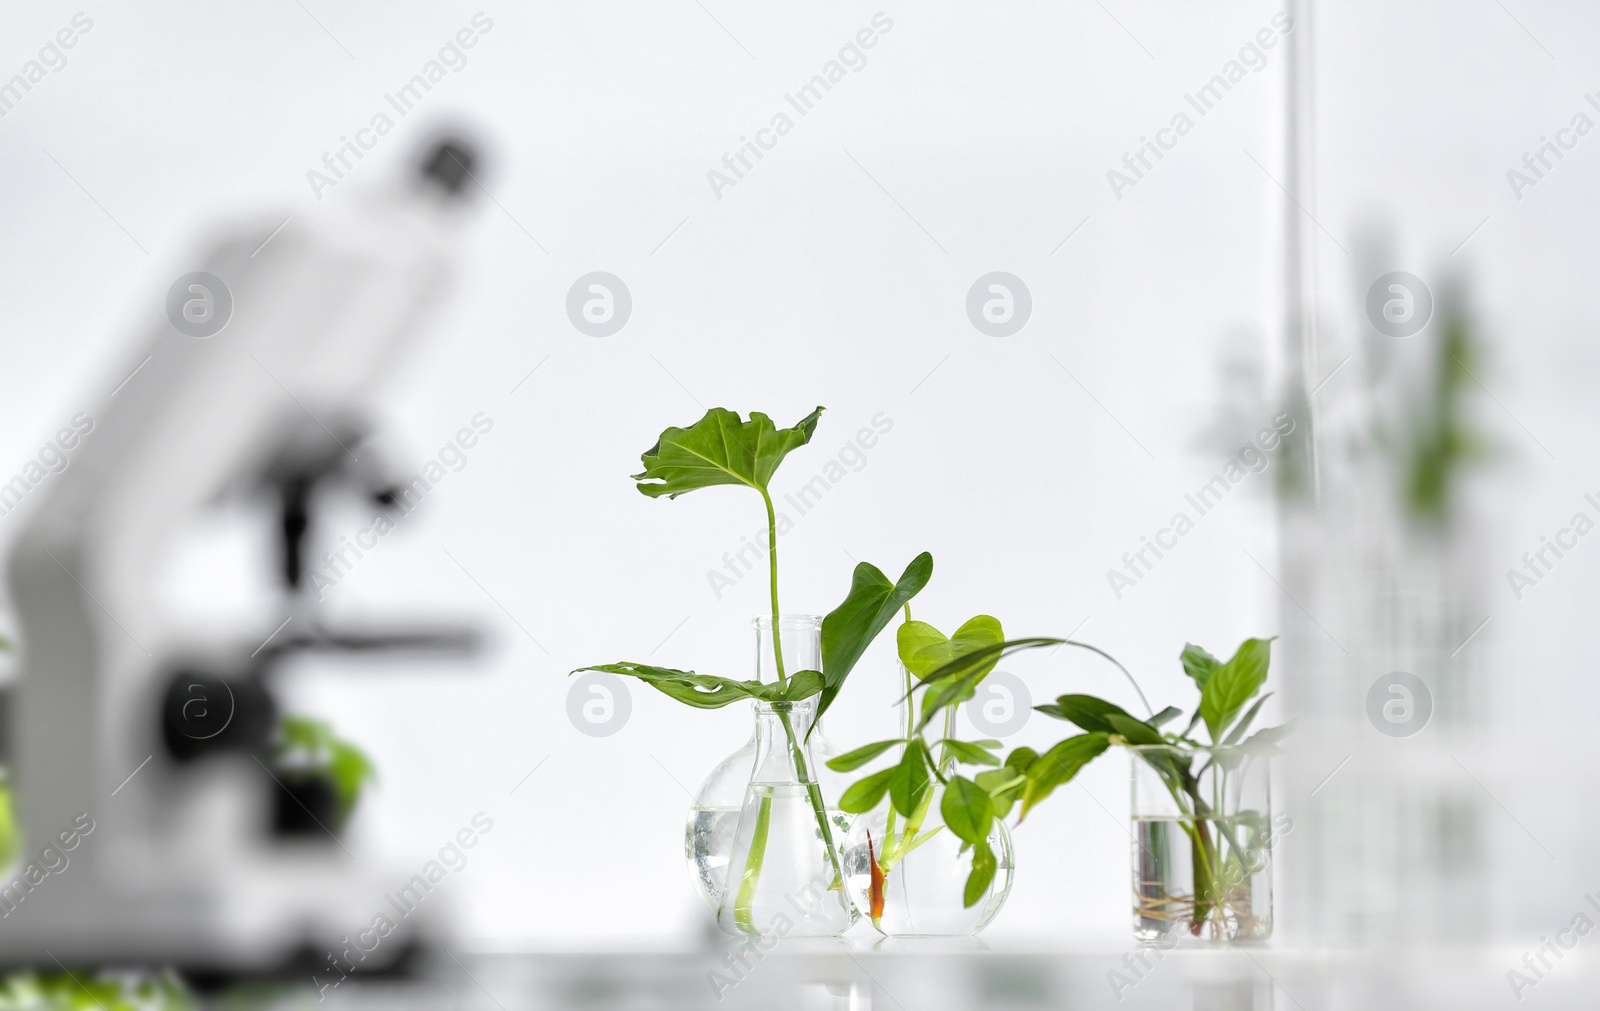 Photo of Laboratory glassware with different plants on table against blurred background, space for text. Chemistry research